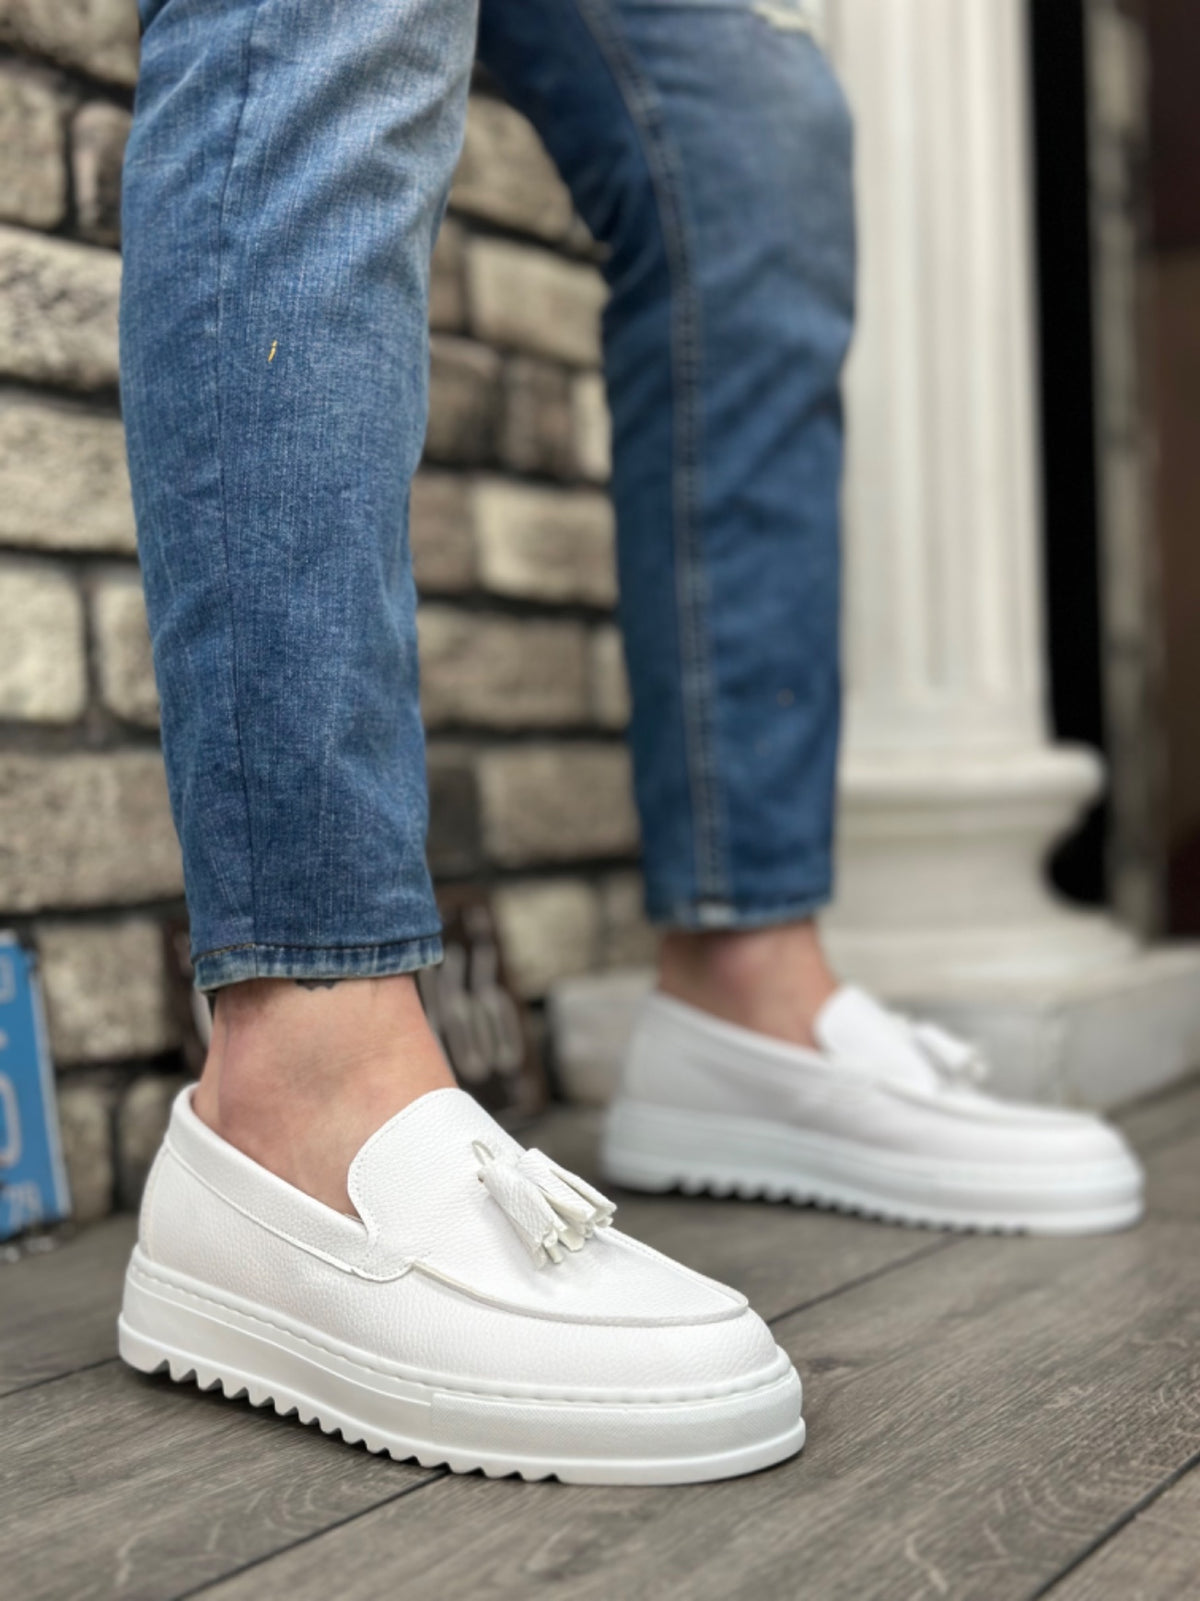 BA0154 Laceless High Sole Skin White Color Tassel Men's Shoes - STREETMODE ™